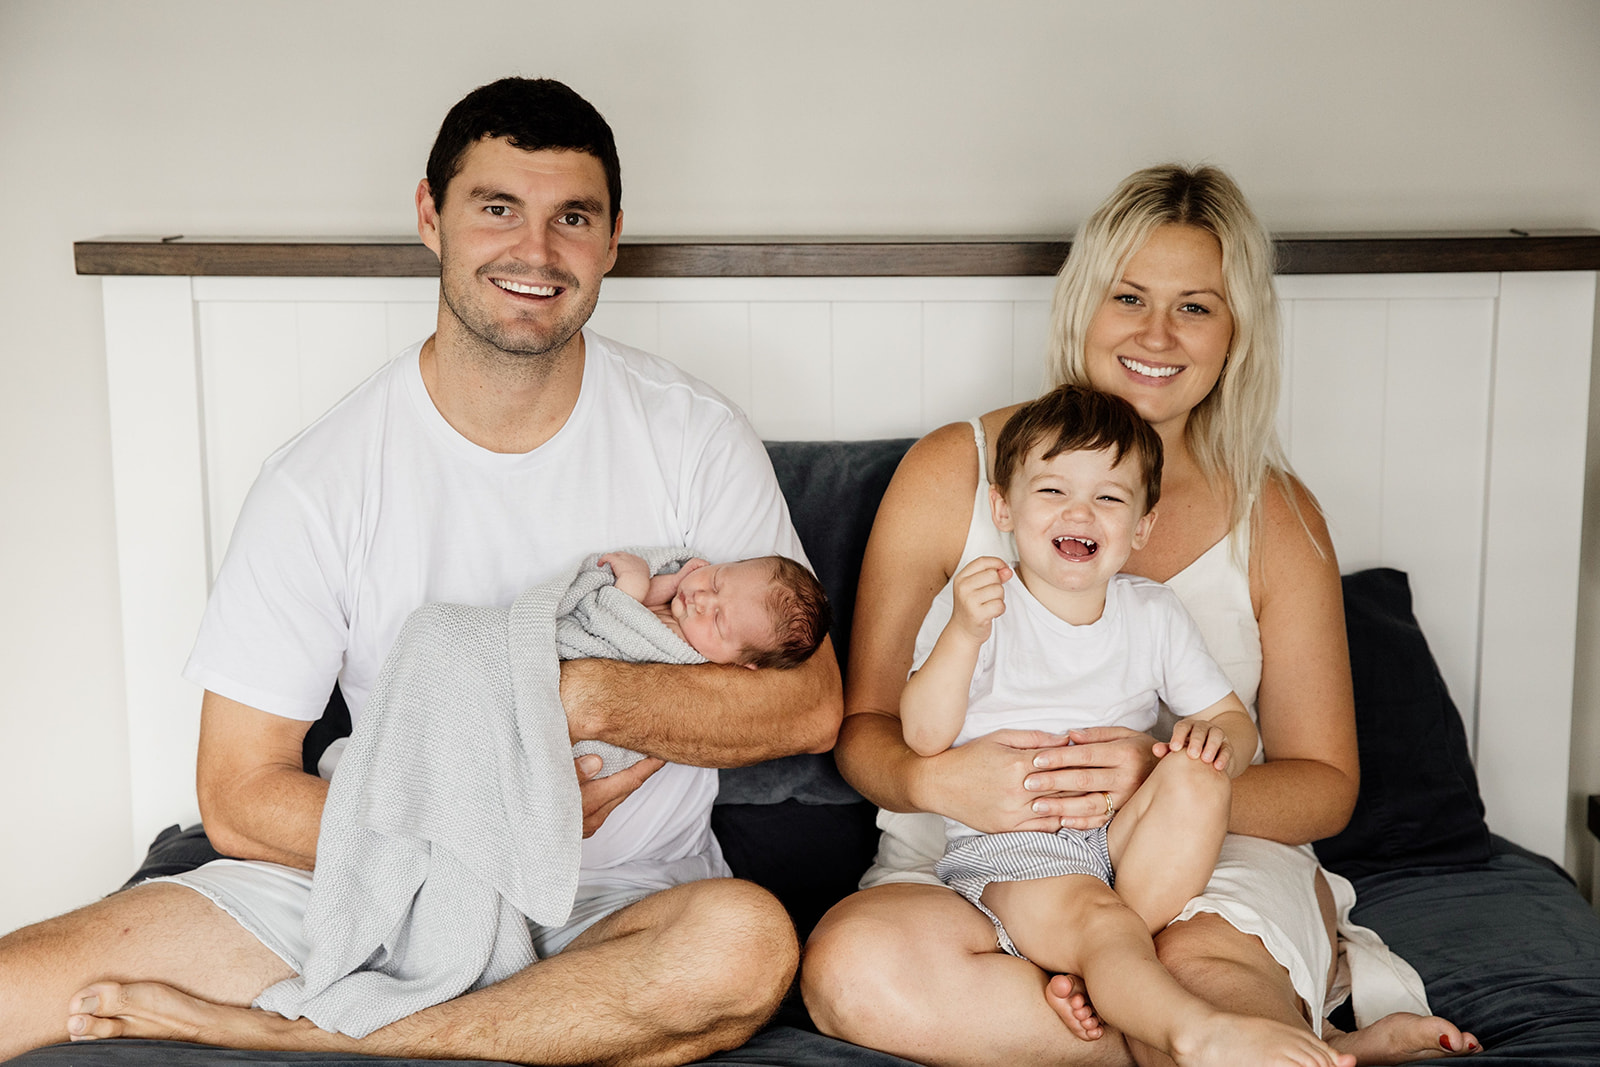 Newborn photographed at home with the whole family with Newcastle Family photographer Jessica Ross